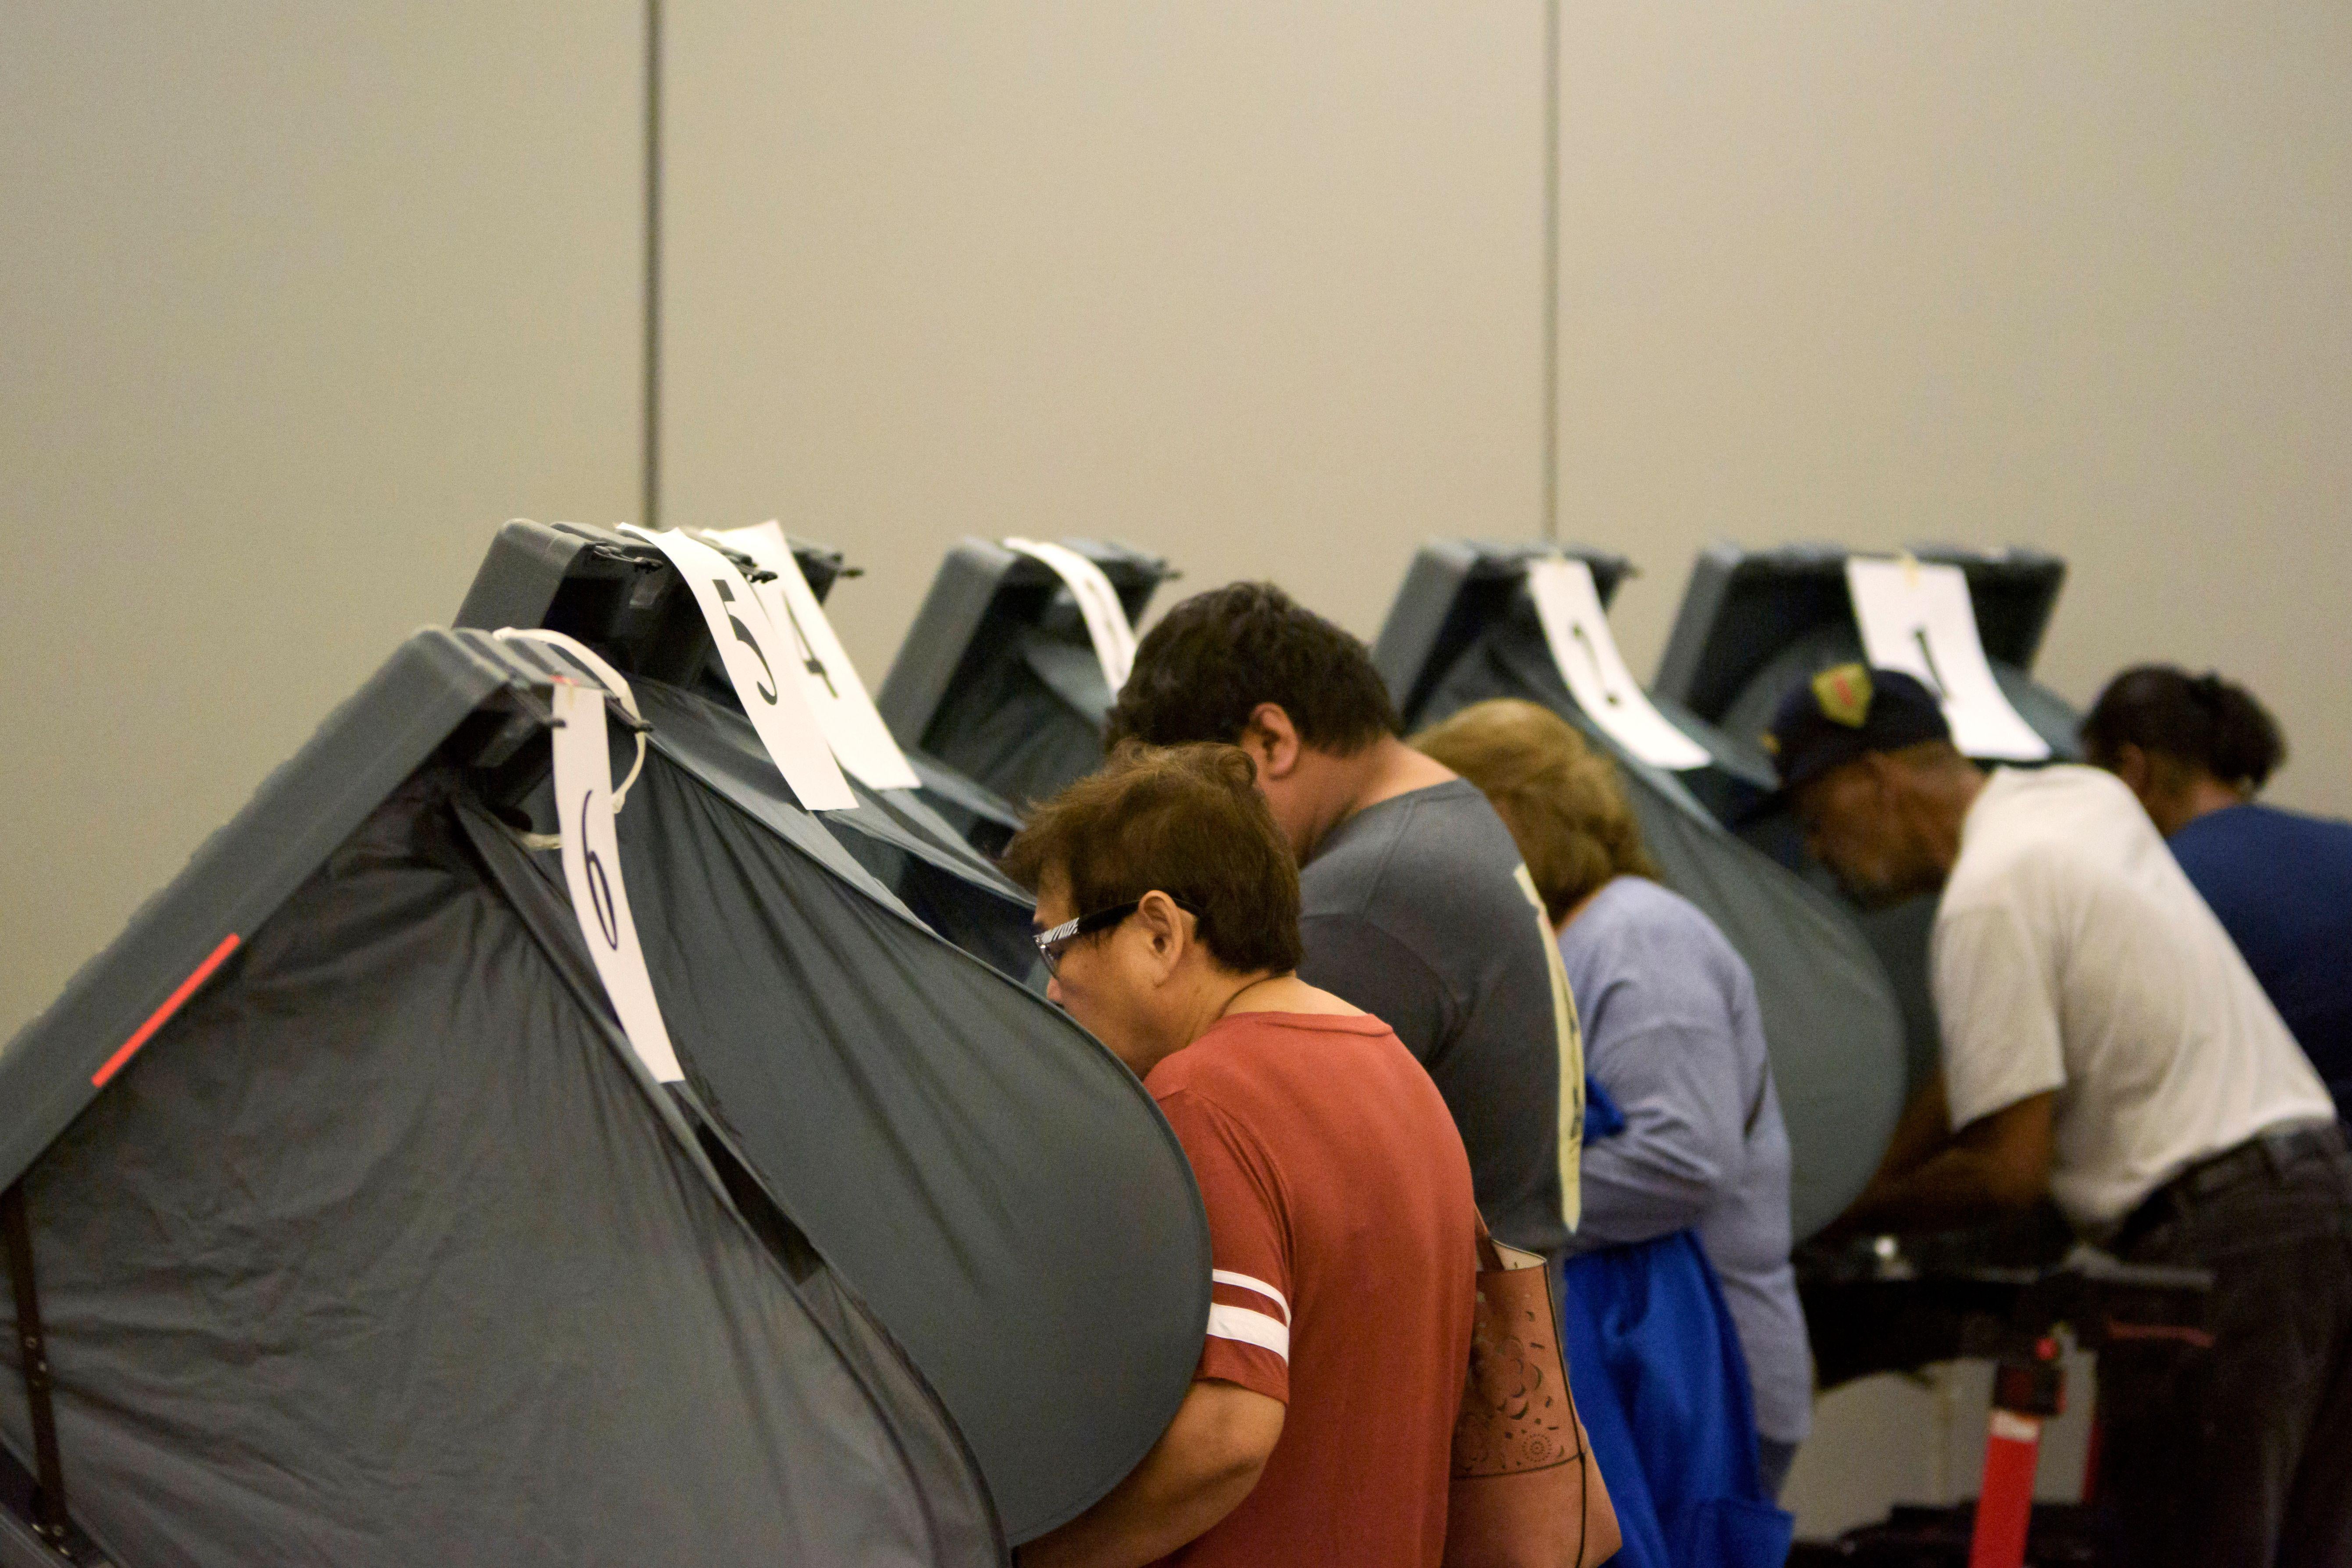 Voters cast their ballots during the Democratic presidential primary in Houston, Texas on Super Tuesday, March 3, 2020. 